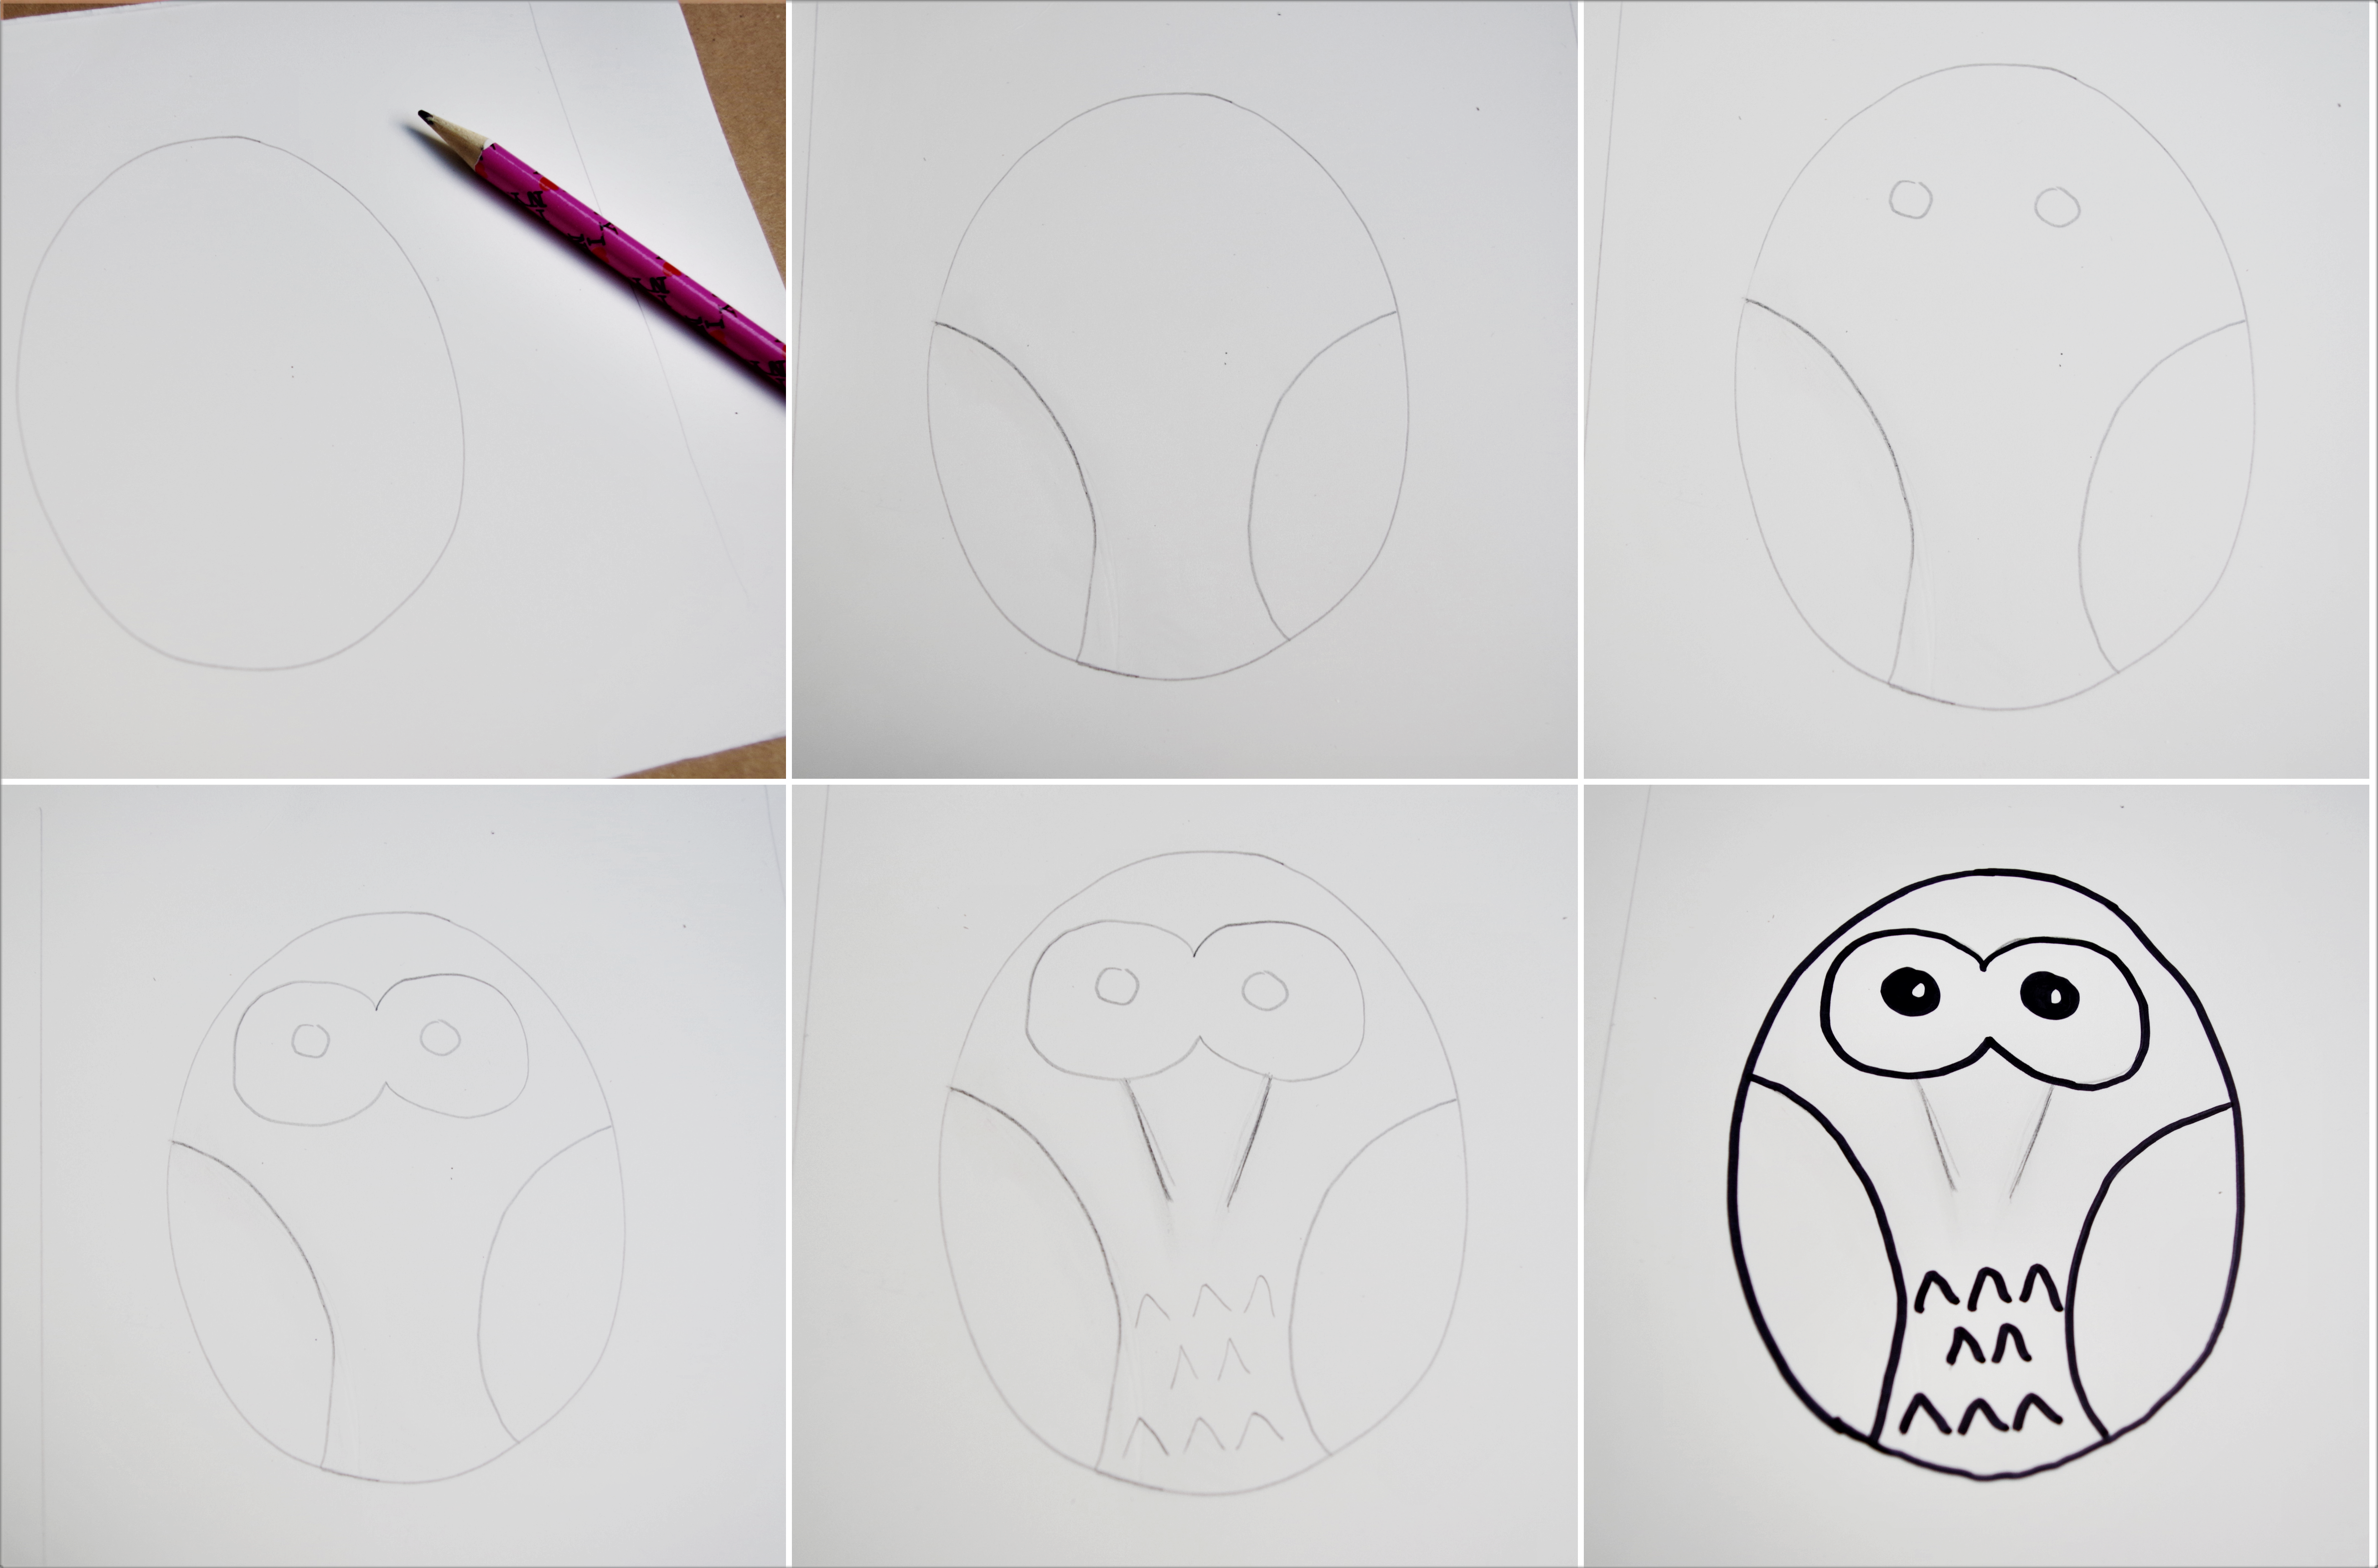 A progression of doodling a cute little owl, first with a pencil, then outlining in ink. The owl is egg-shaped and has round eyes and little feathers on its chest. 